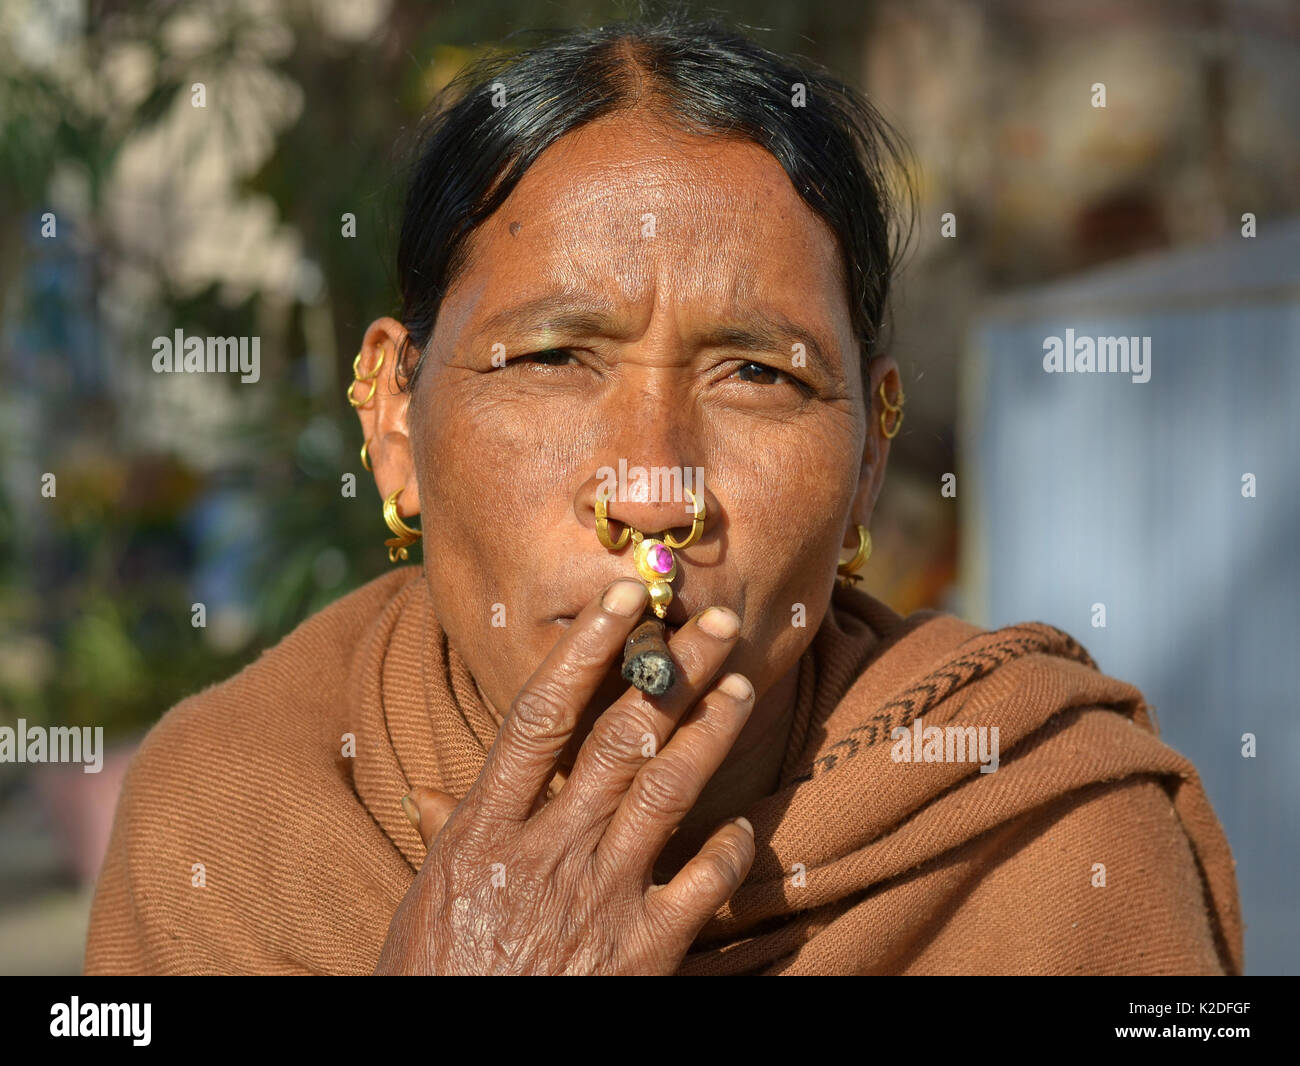 Elderly Indian Adivasi woman (Desia Kondh tribe, Kuvi Kondh tribe) with gold-and-gemstone nose jewellery and tribal earrings smokes a home-made cigar. Stock Photo